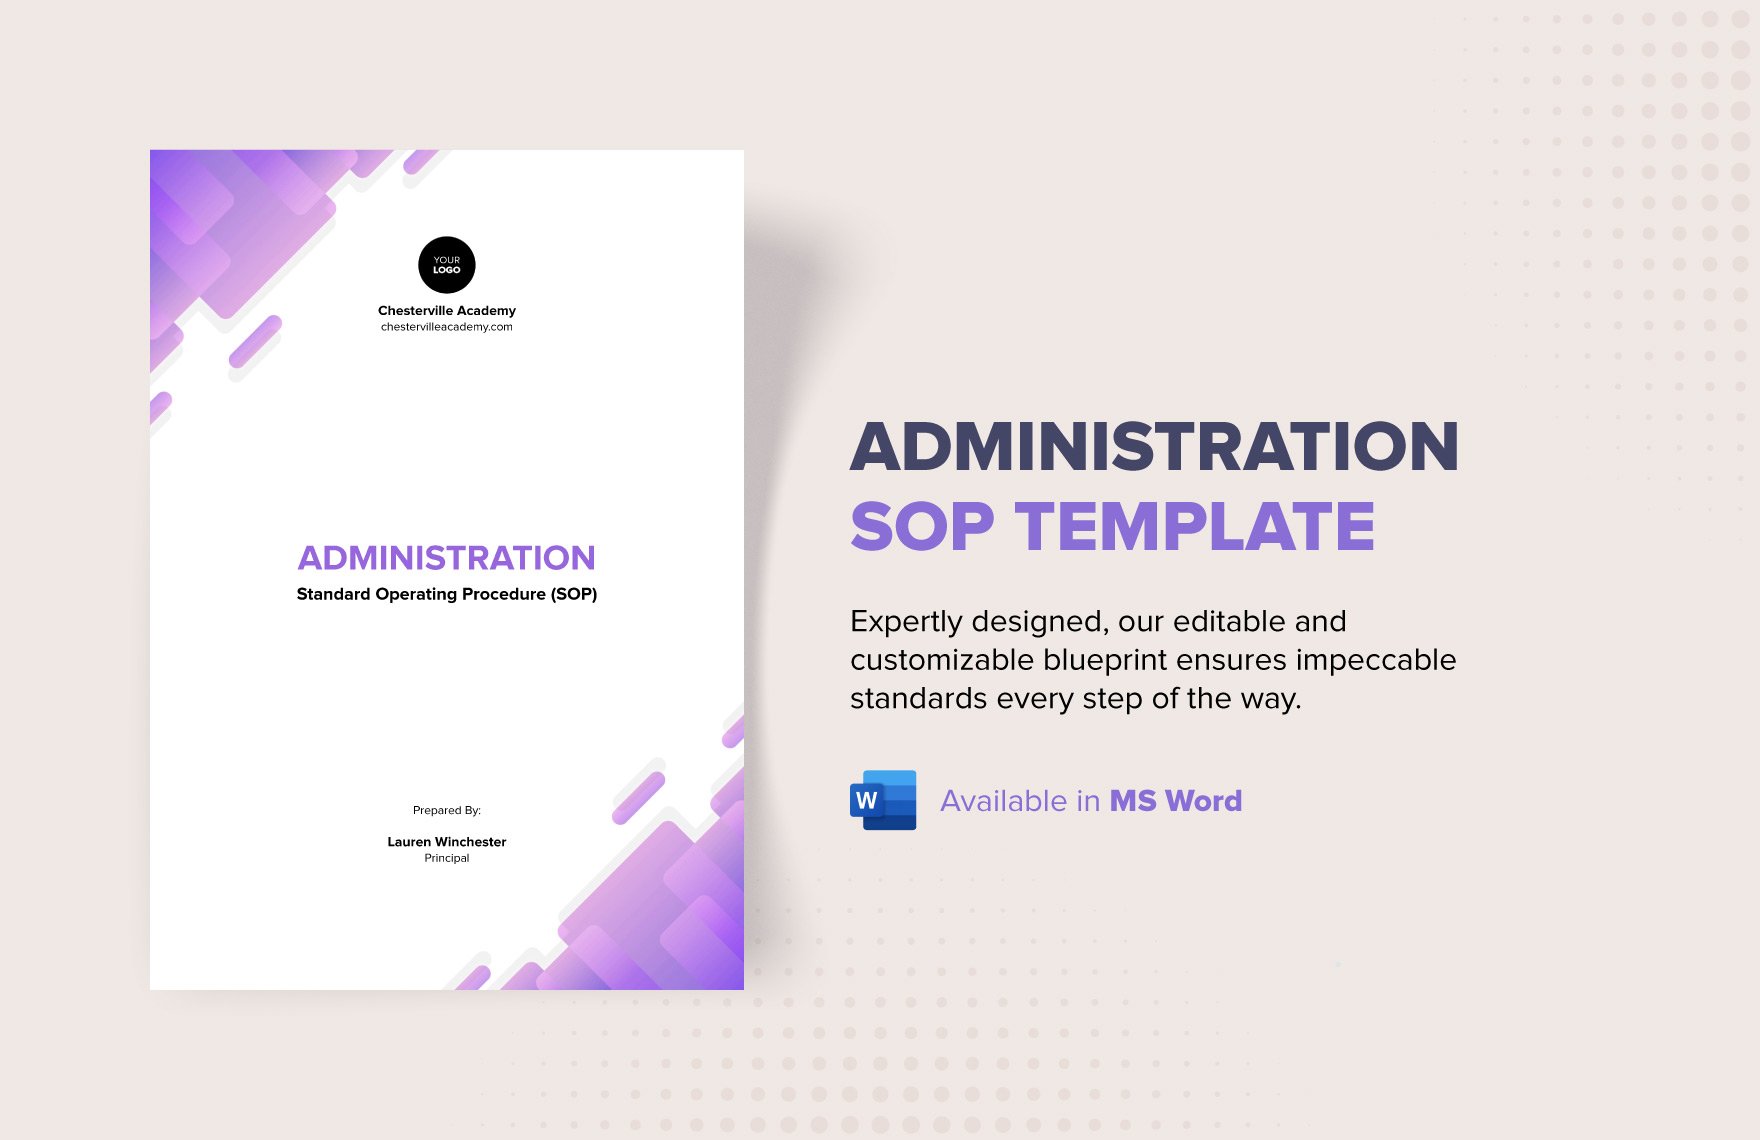 Administration SOP Template